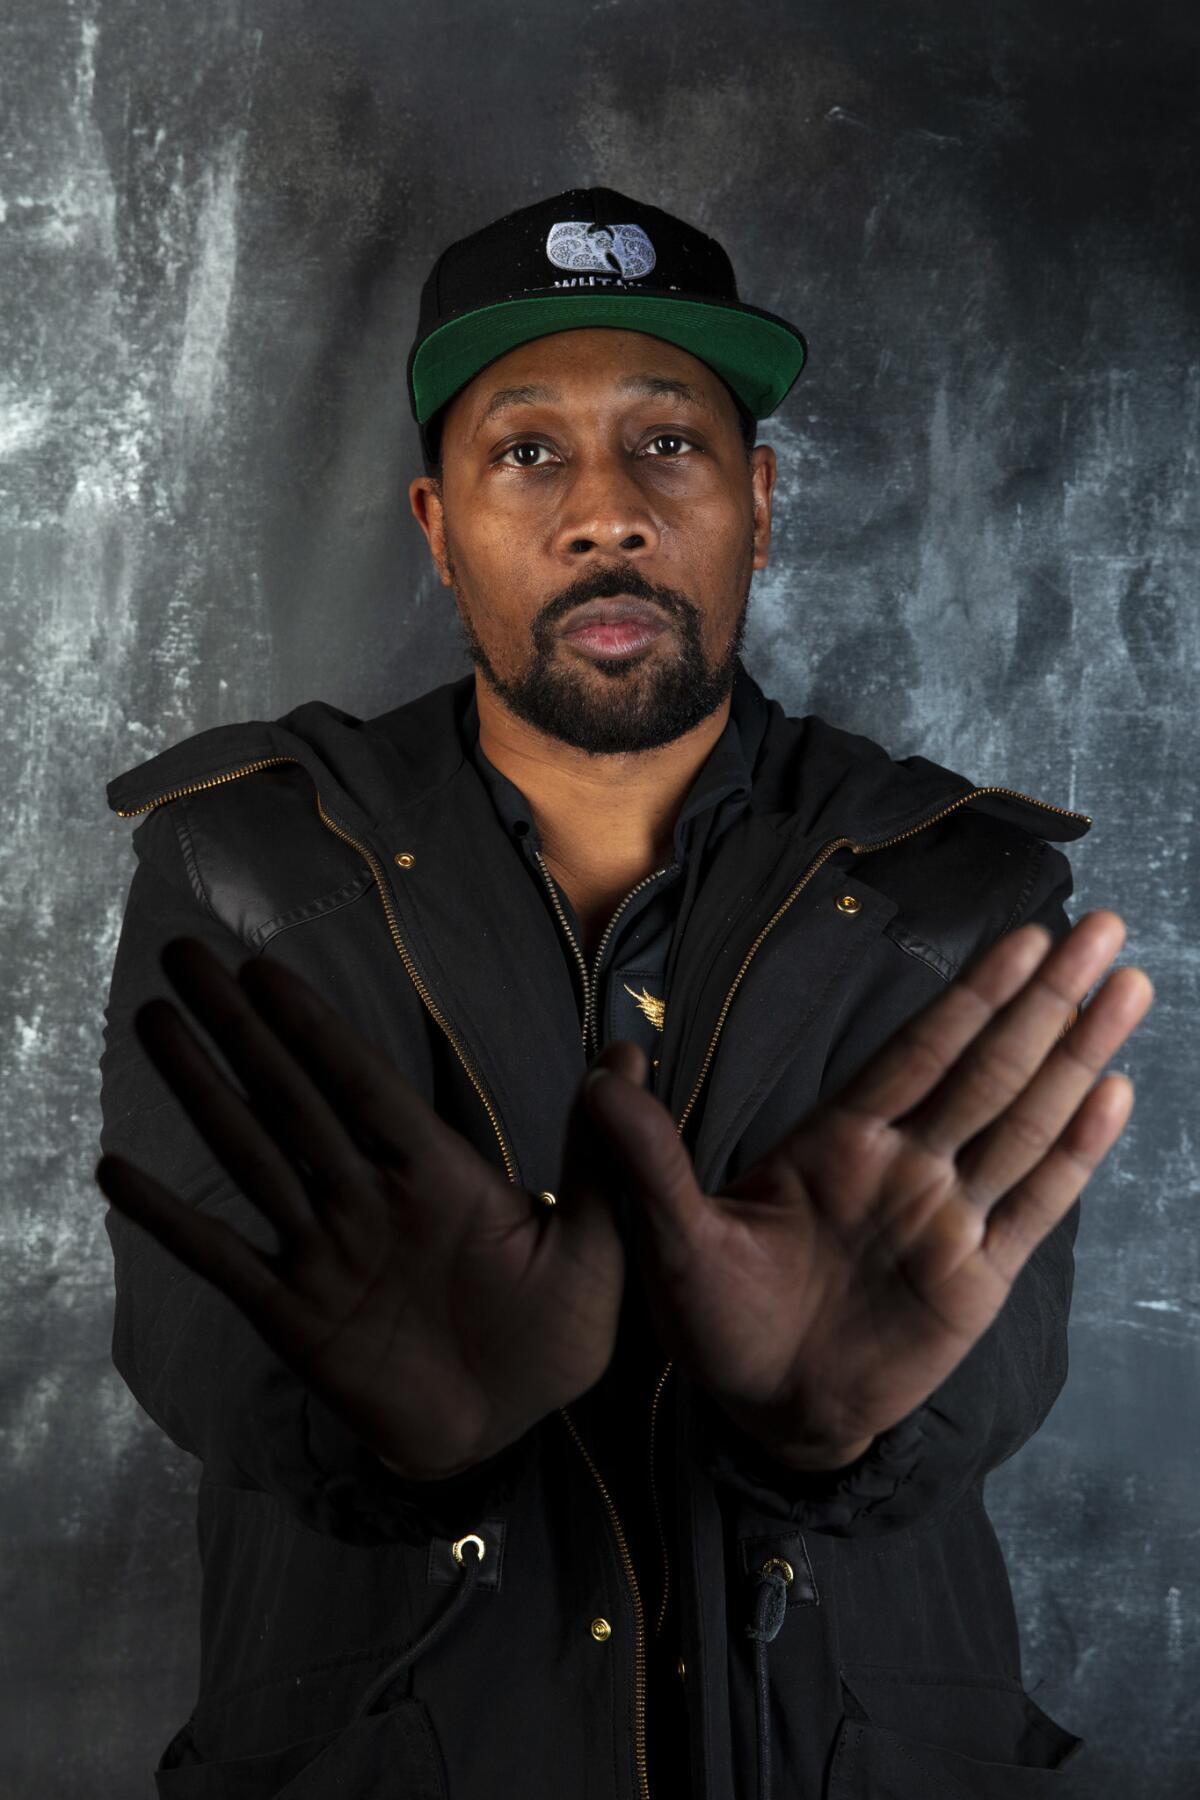 RZA of the Wu-Tang Clan at the L.A. Times Photo and Video Studio at the 2019 Sundance Film Festival, in Park City, Utah.